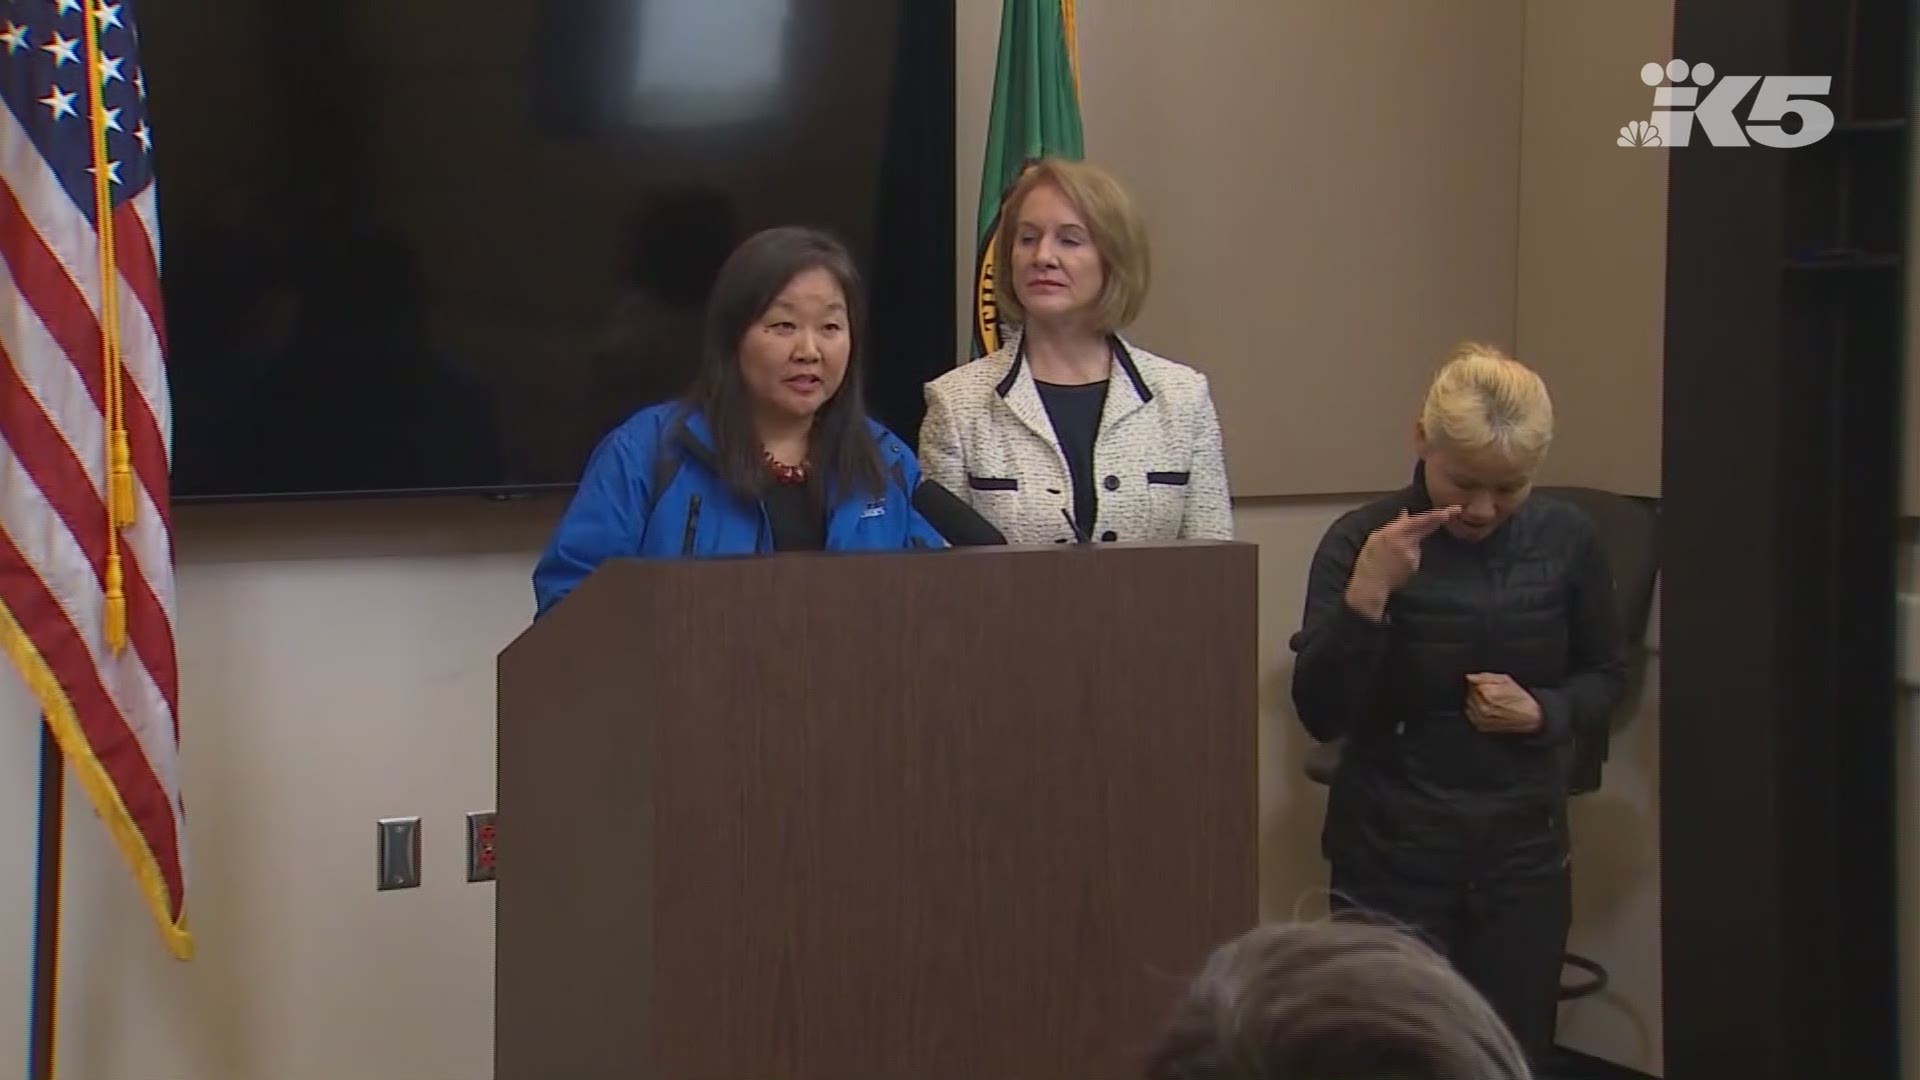 Seattle Public Utilities General Manager and CEO Mami Hara shares the status of garbage, recycling, and food waste pickup in Seattle on February 12, 2019 after a storm brought over 20 inches of snow to the area over the last 10 days.